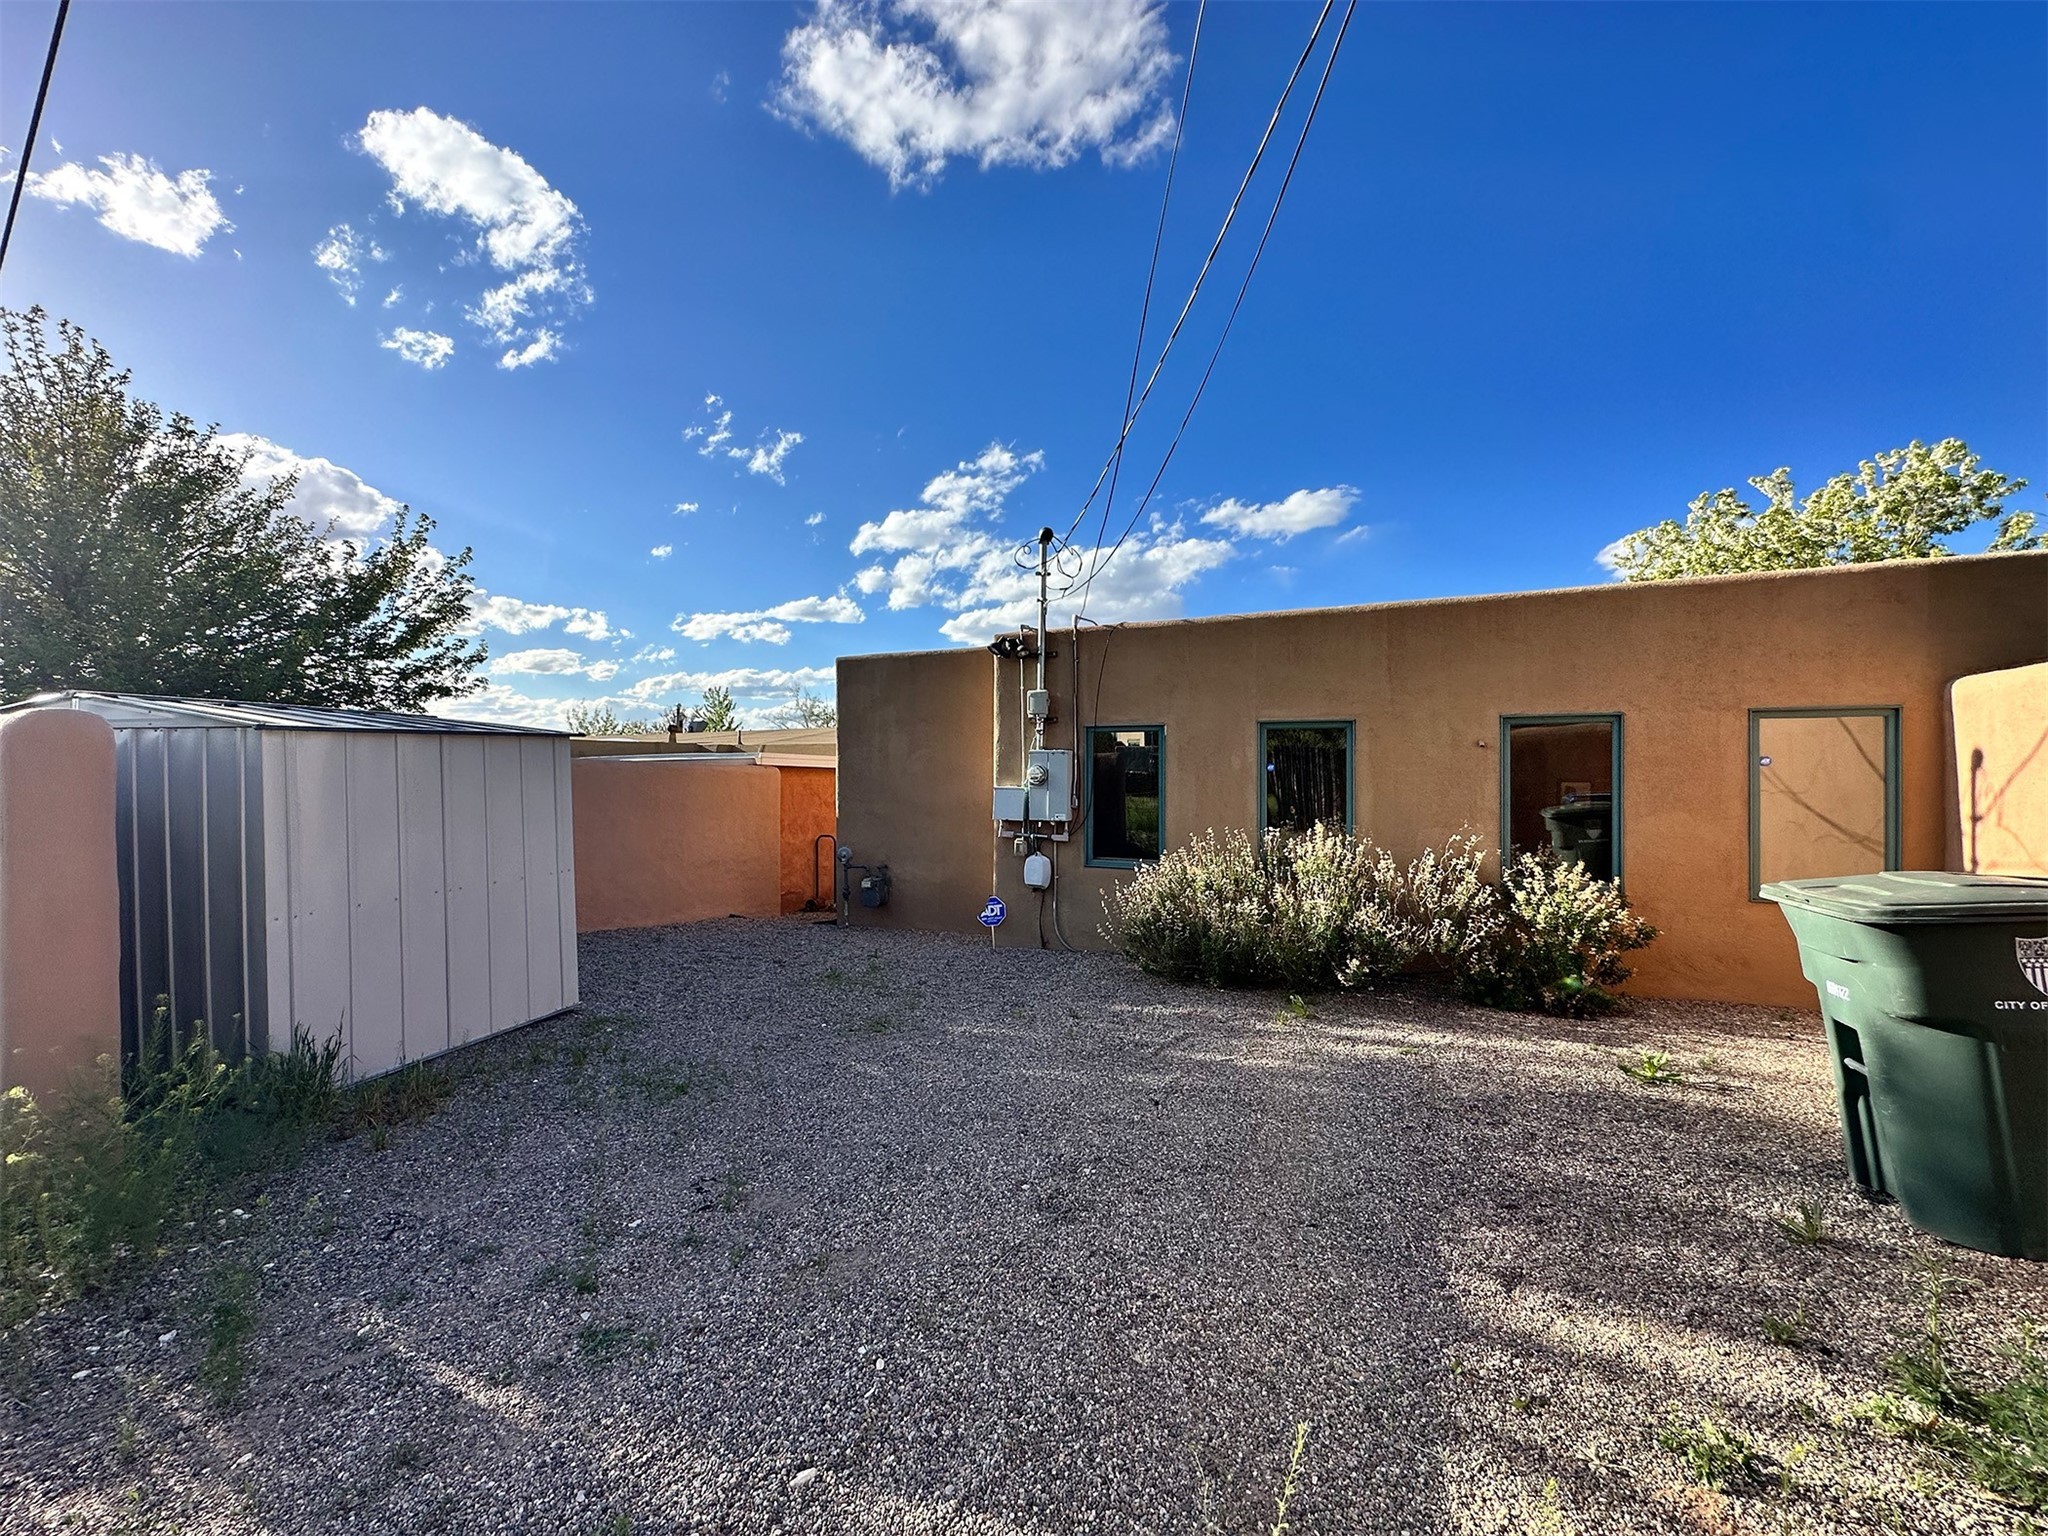 601 Don Canuto B, Santa Fe, New Mexico 87505, 2 Bedrooms Bedrooms, ,3 BathroomsBathrooms,Residential,For Sale,601 Don Canuto B,202337886